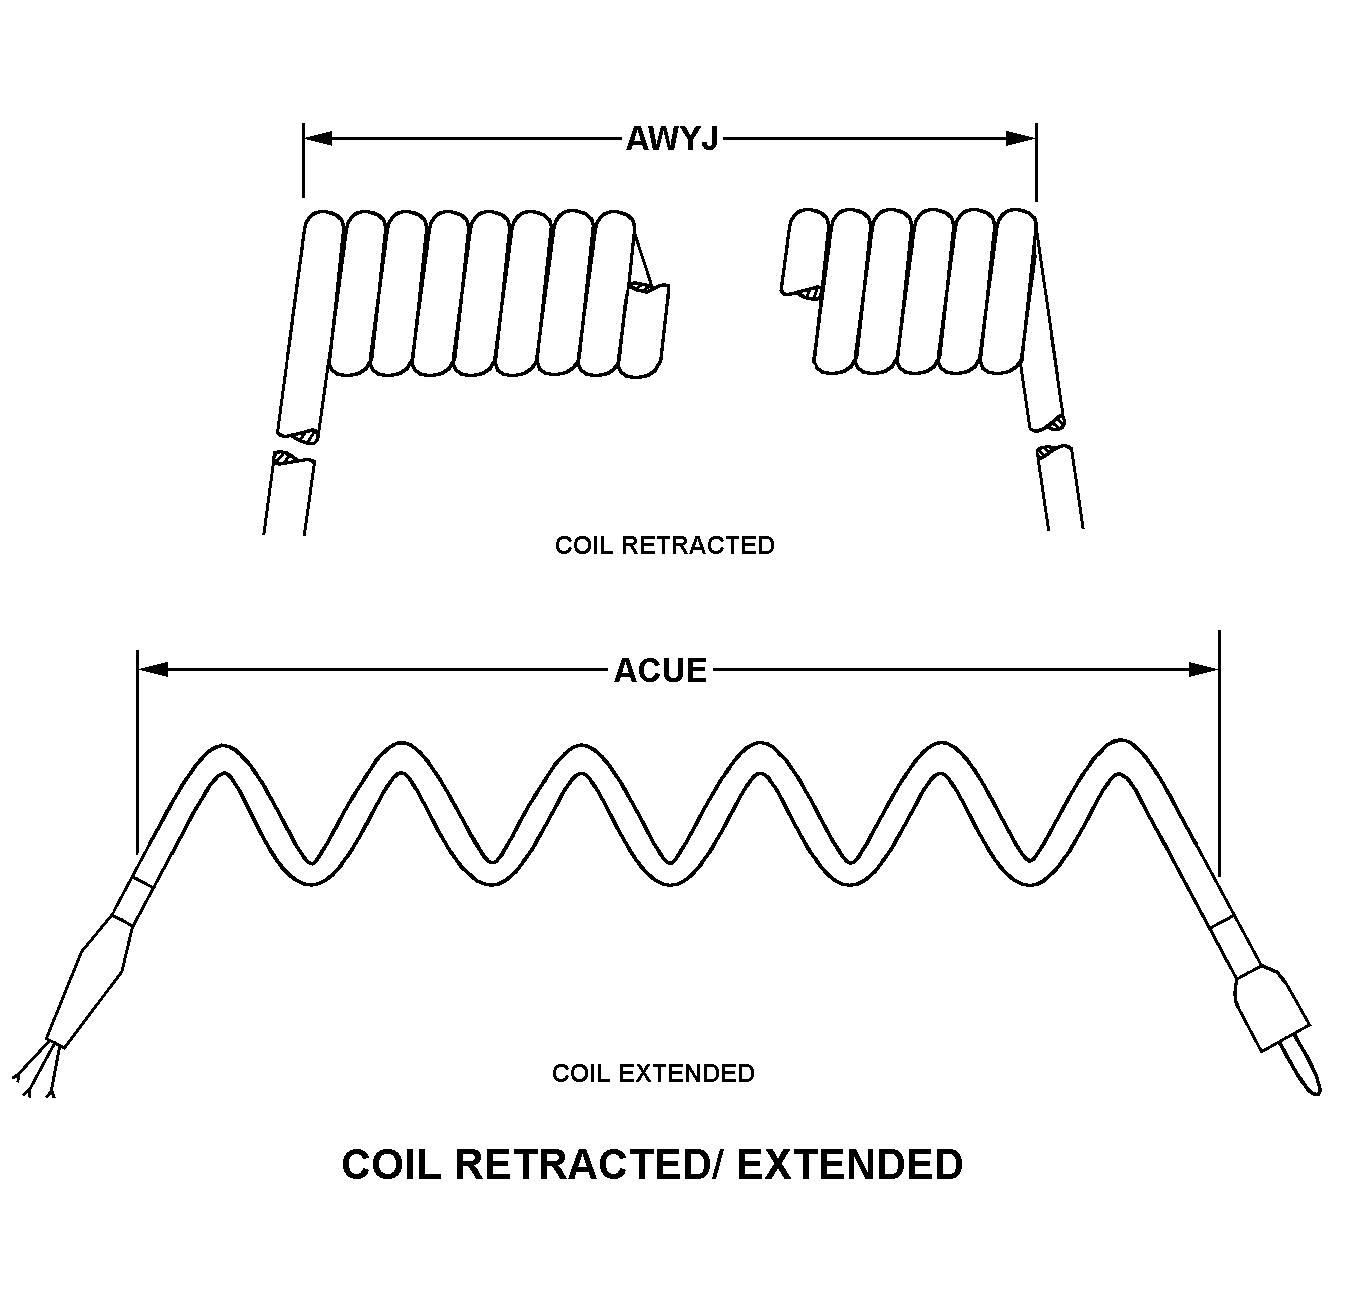 COIL RETRACTED/EXTENDED style nsn 6150-01-031-8095